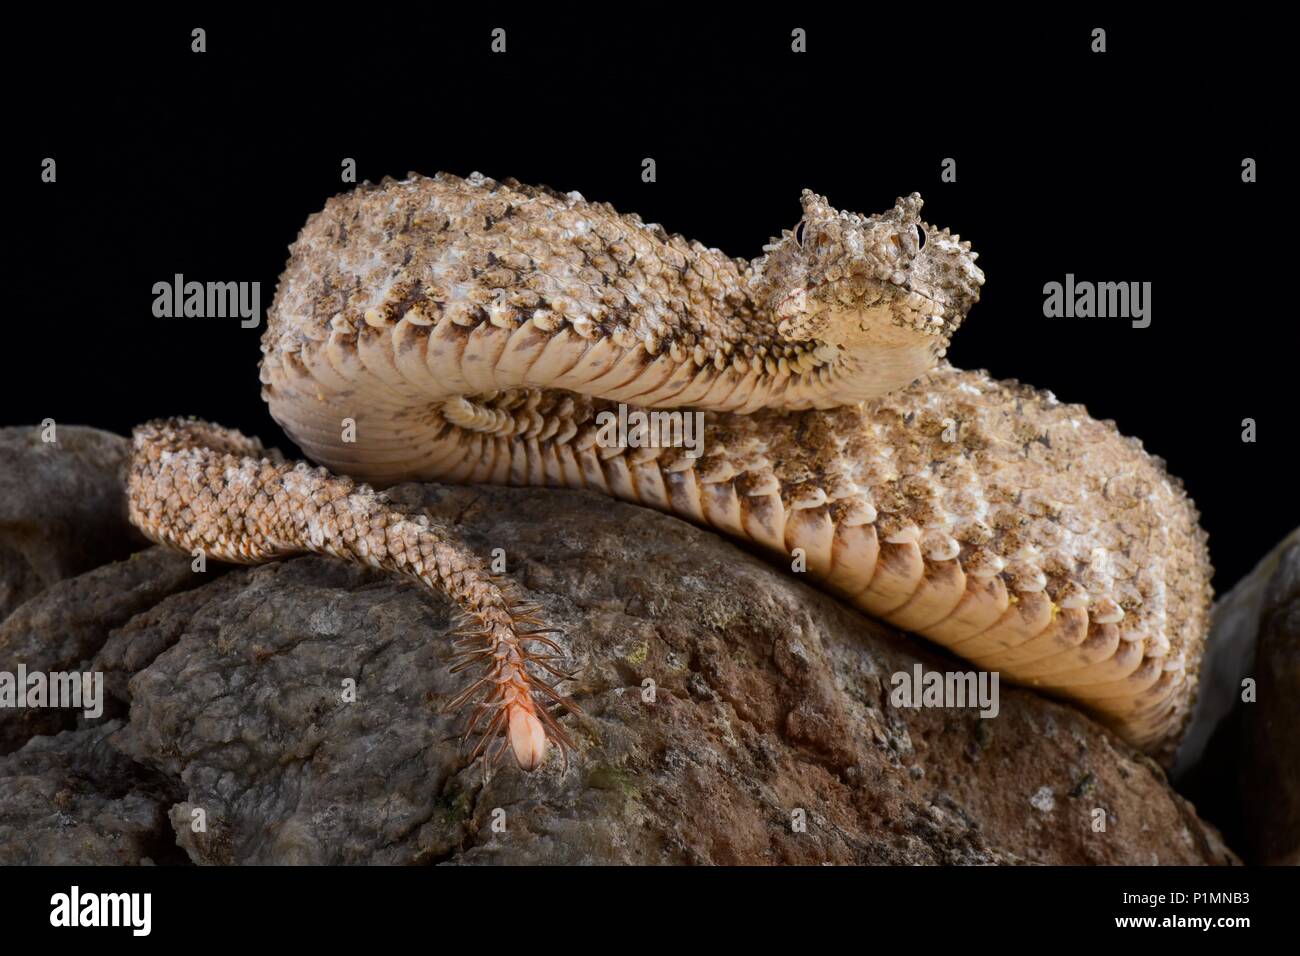 The spider-tailed horned viper (Pseudocerastes urarachnoides) is a species of viper endemic to western Iran which was described in 2006. The head look Stock Photo